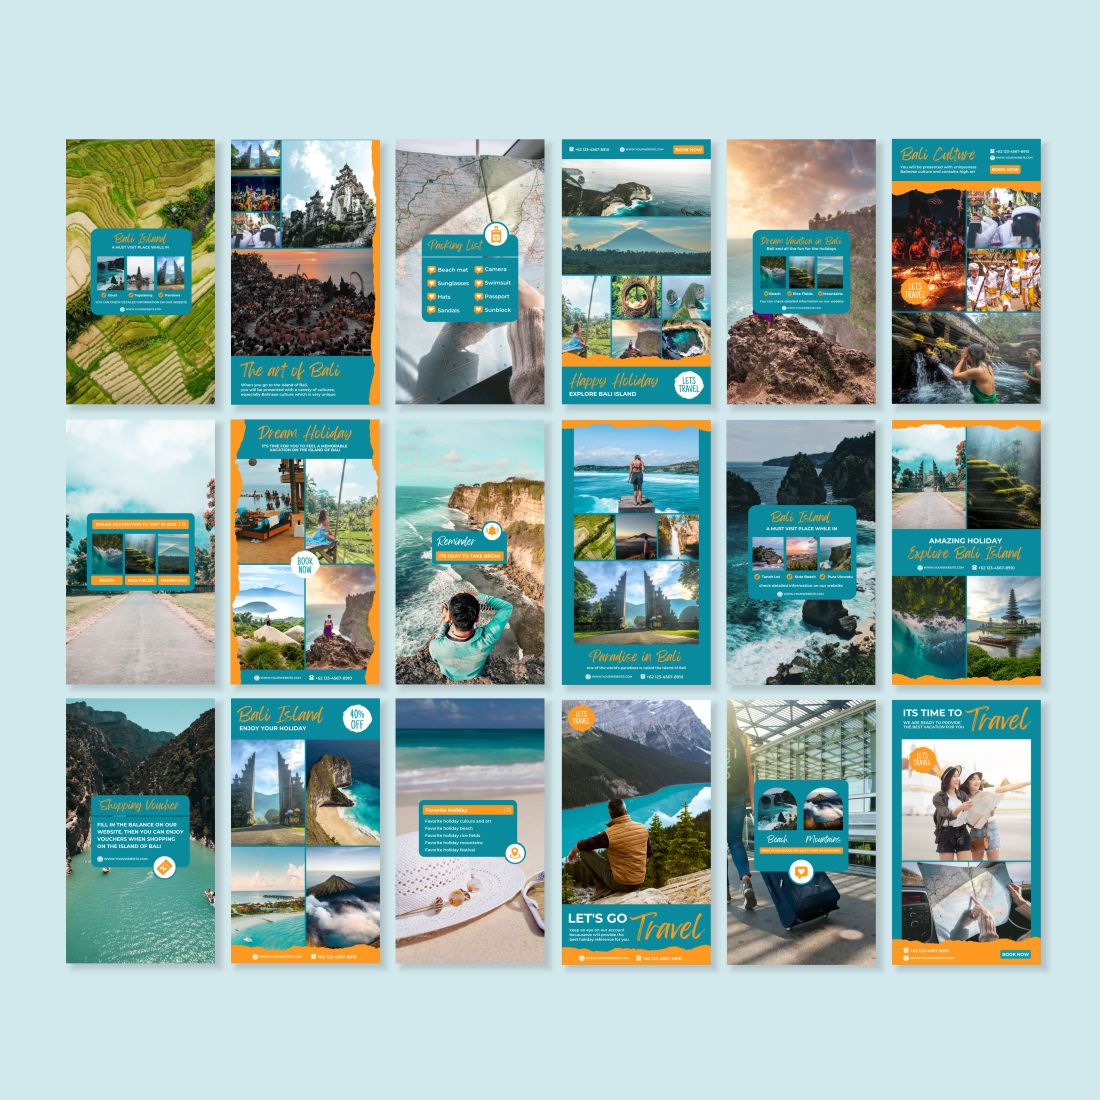 Travel Agency Canva Instagram Template Story Example.